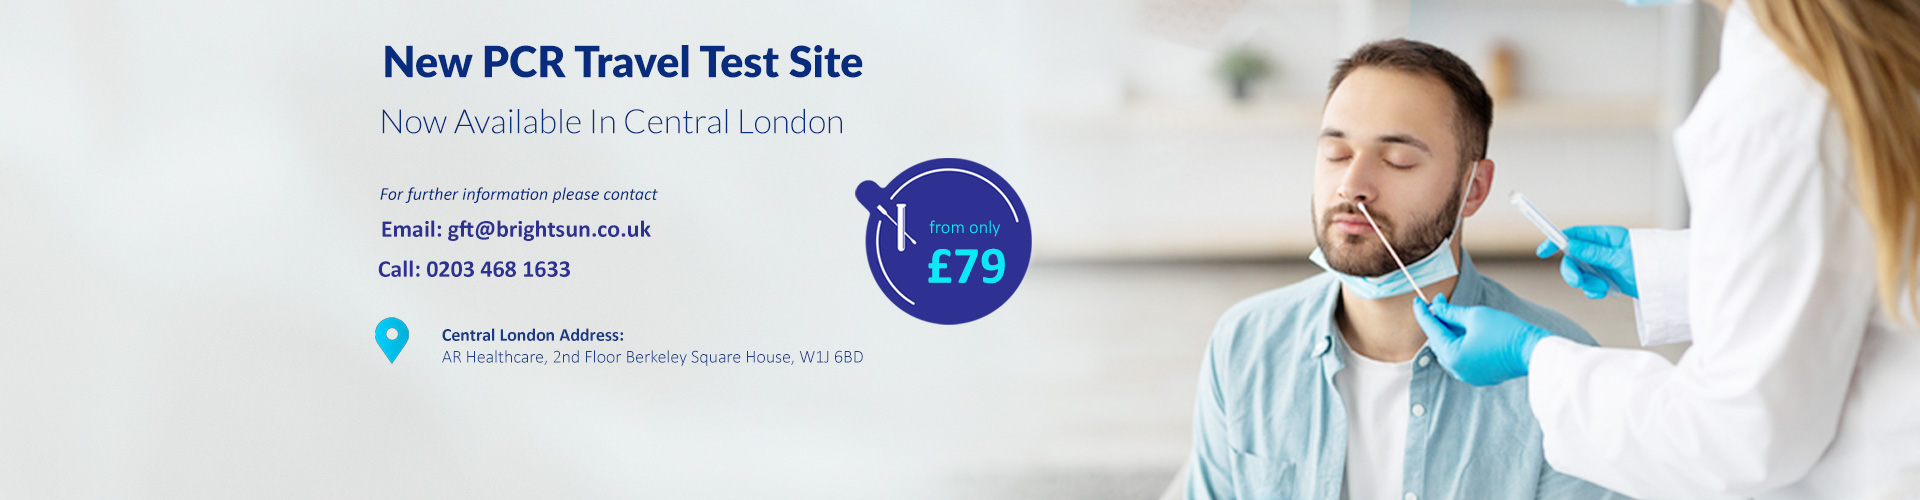 New-PCR-Travel-Test-Central-London